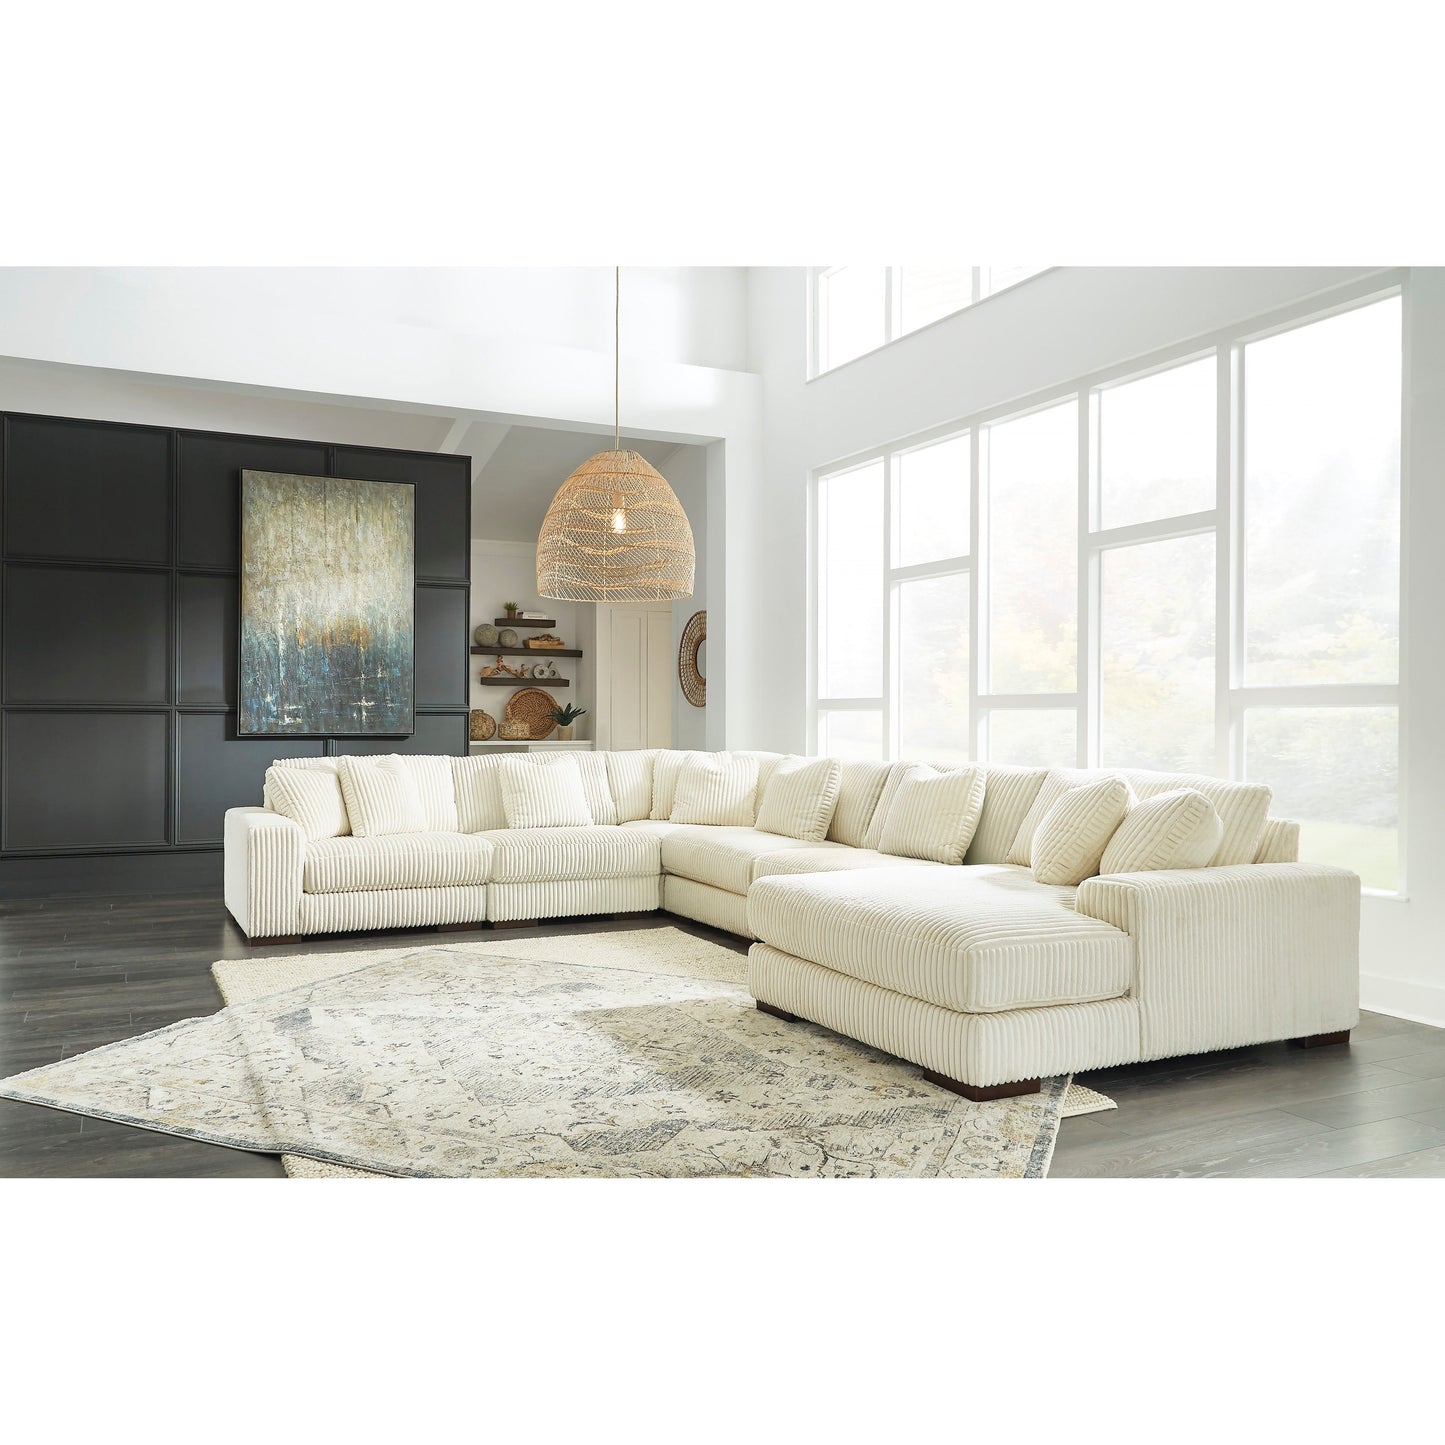 LINDYN 6 PIECE SECTIONAL WITH CHAISE - IVORY